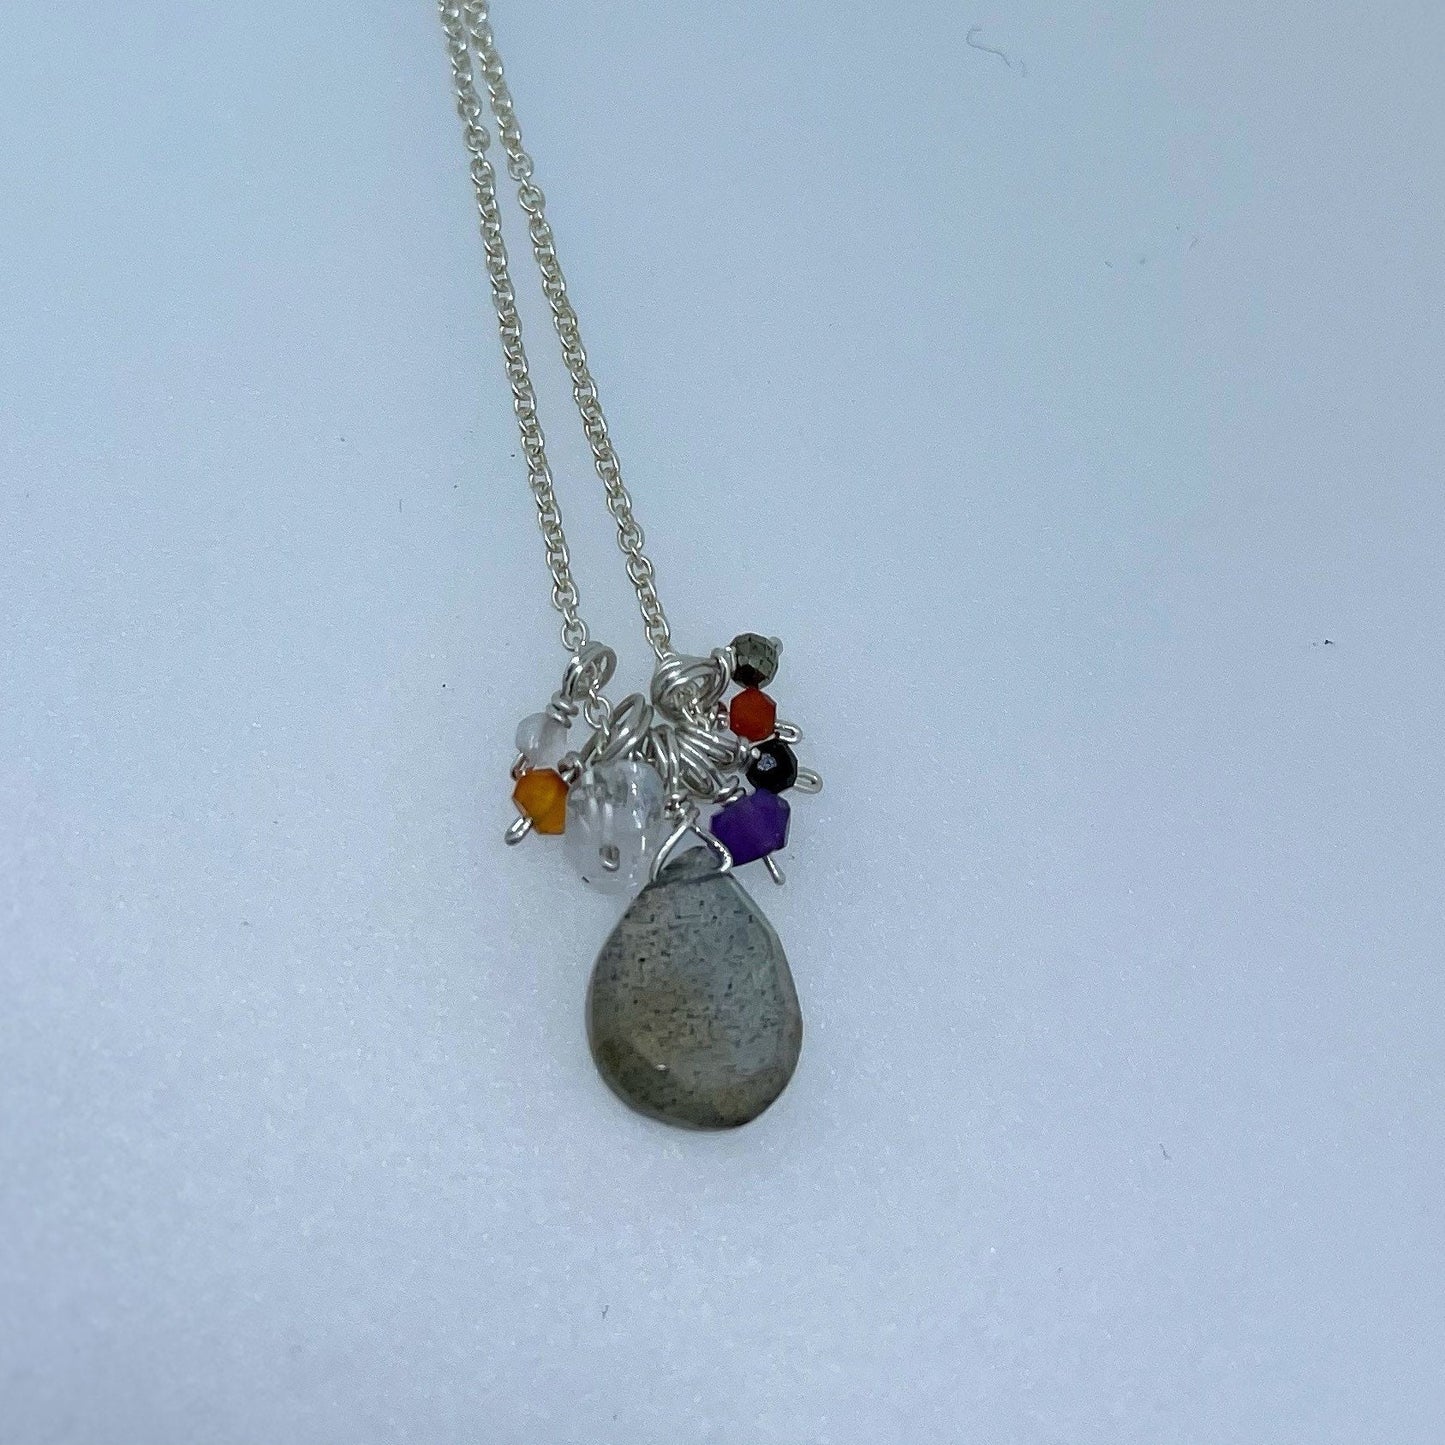 Wellness and Prosperity Necklace